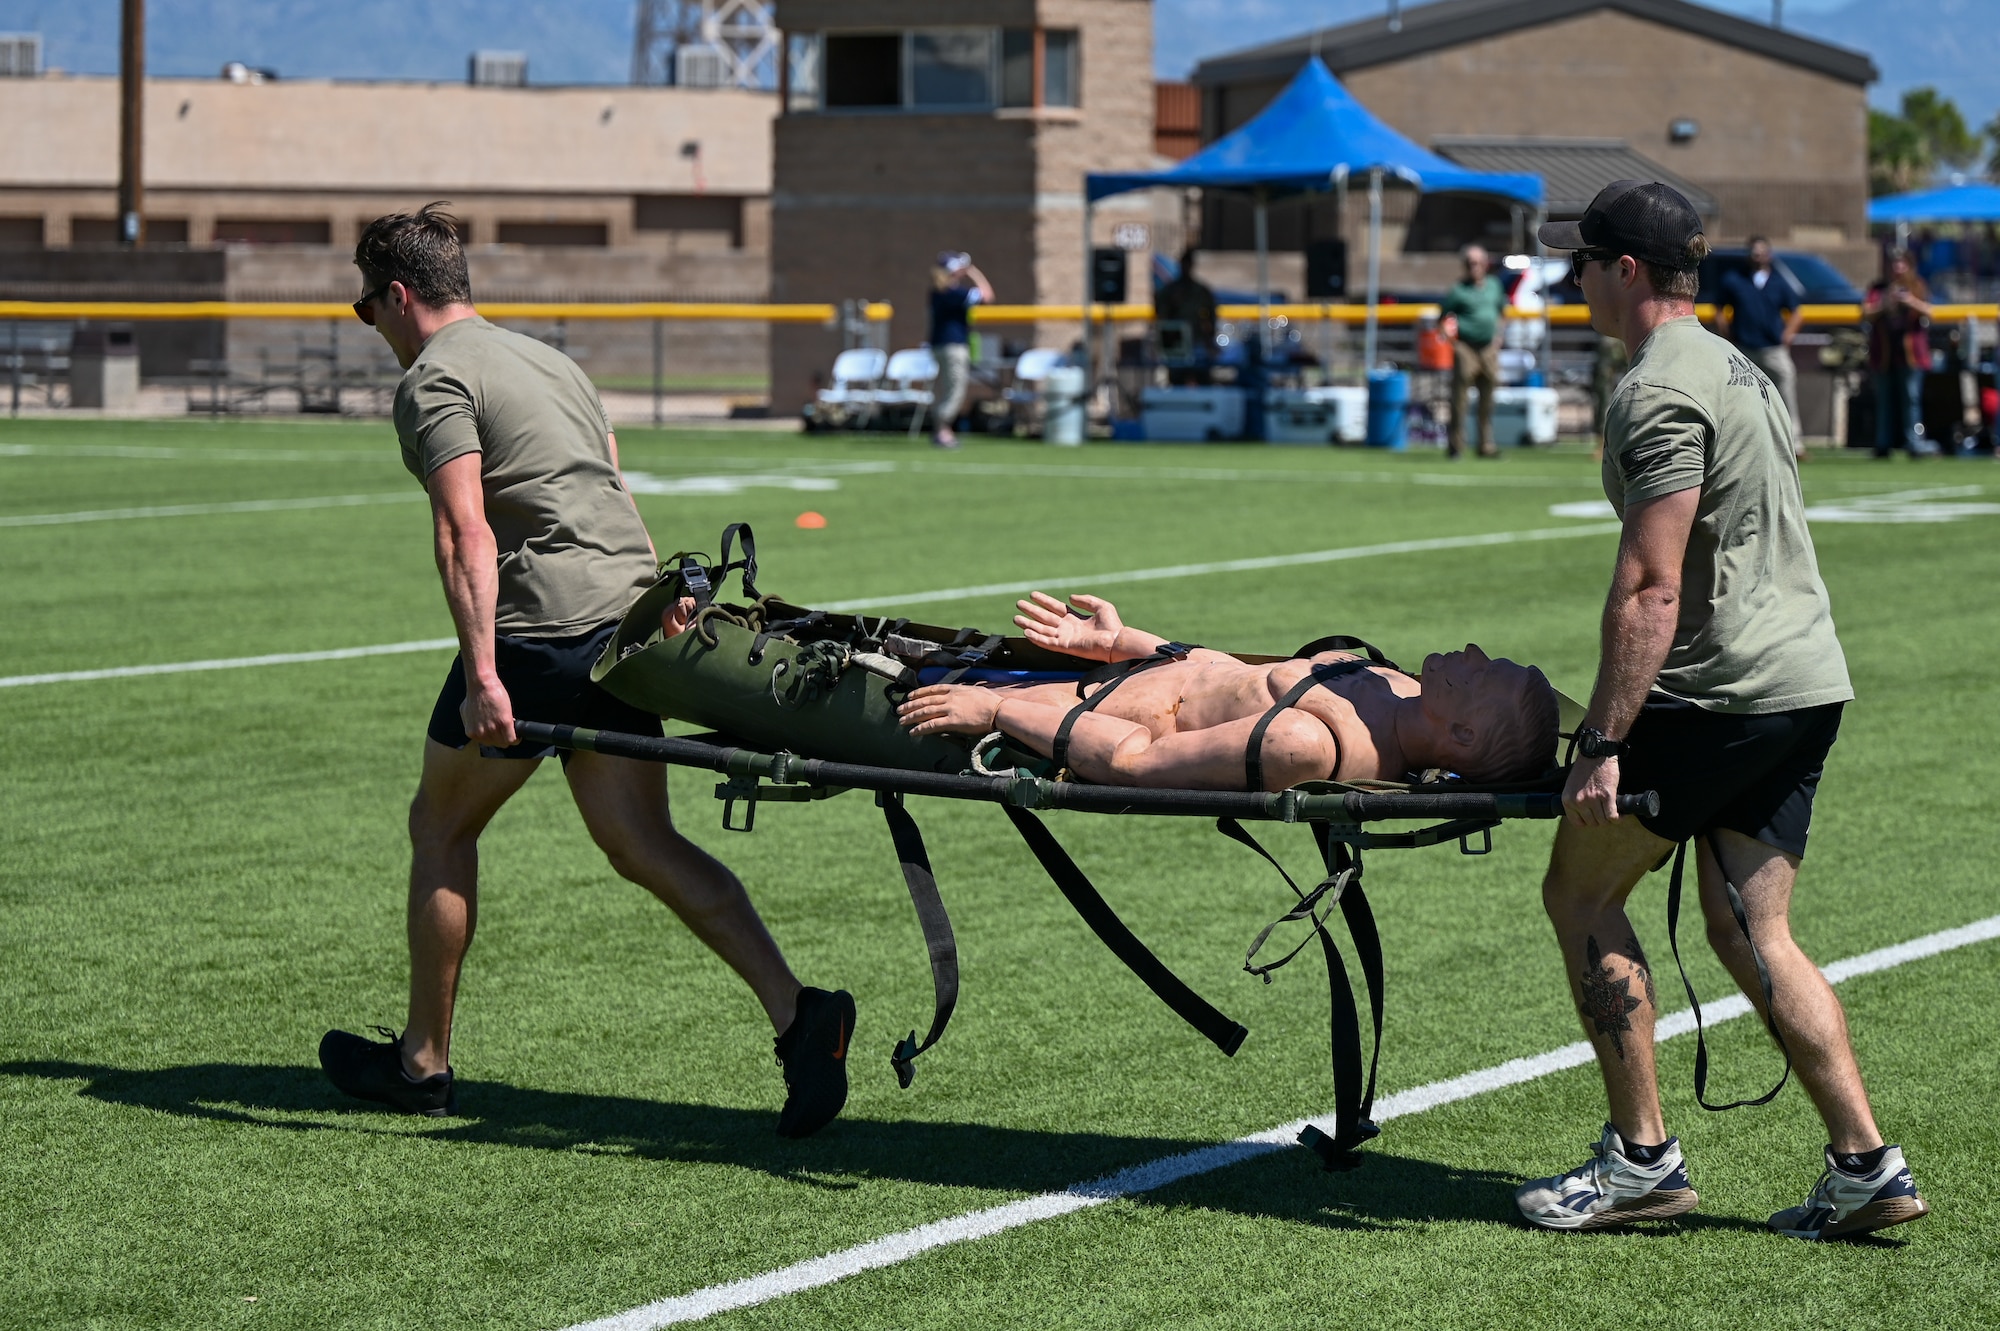 A photo of Airmen carrying a stretcher.